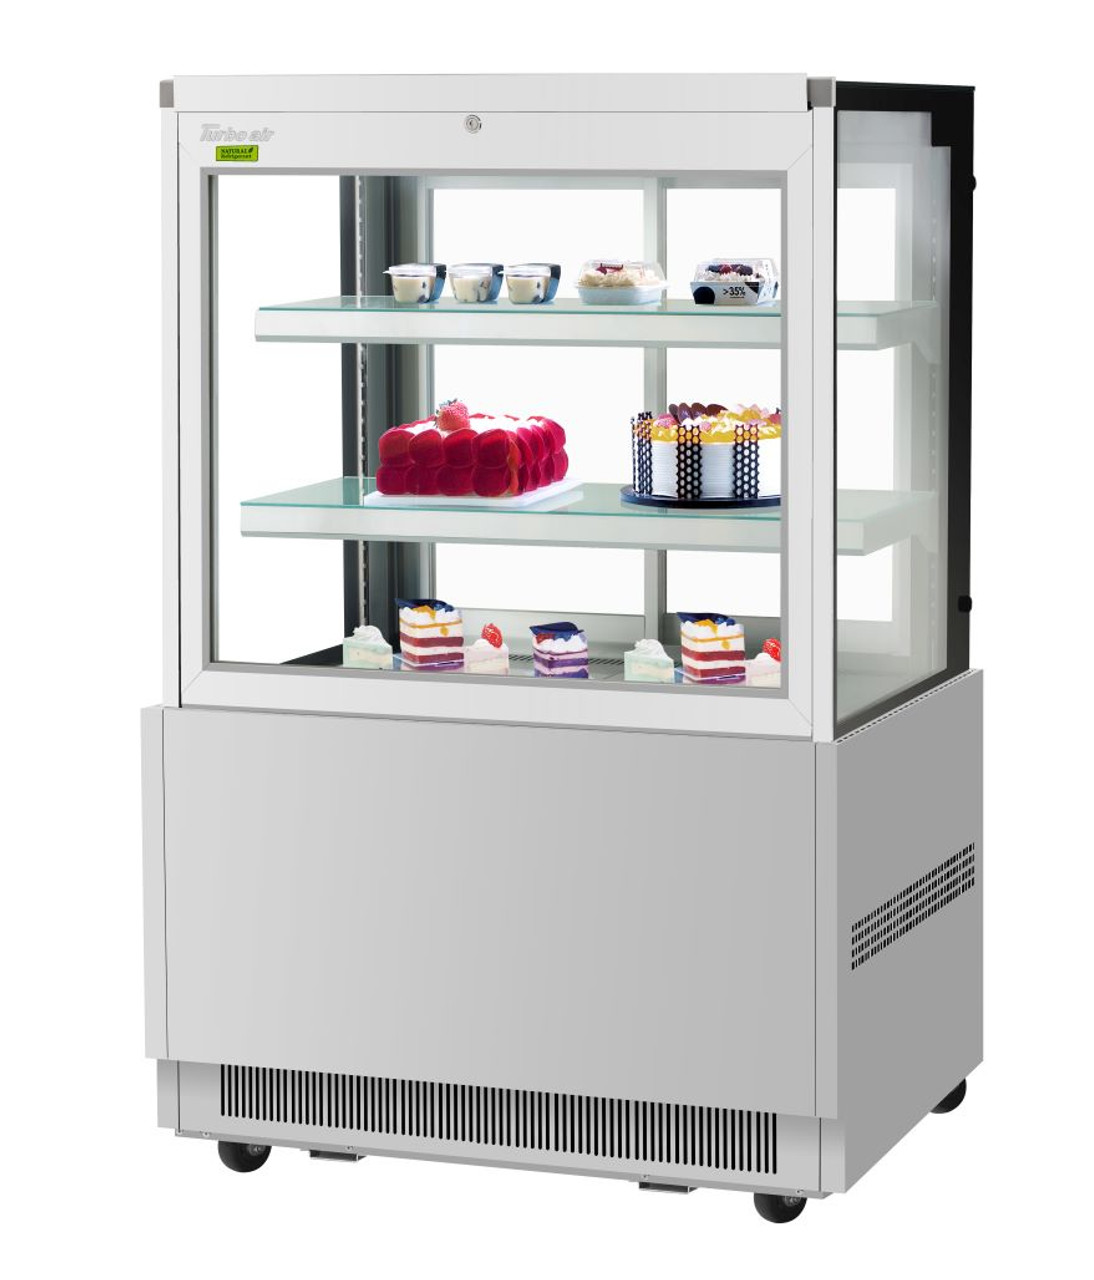 Turbo Air Bakery display case, Refrigerated TBP36-54FN-S